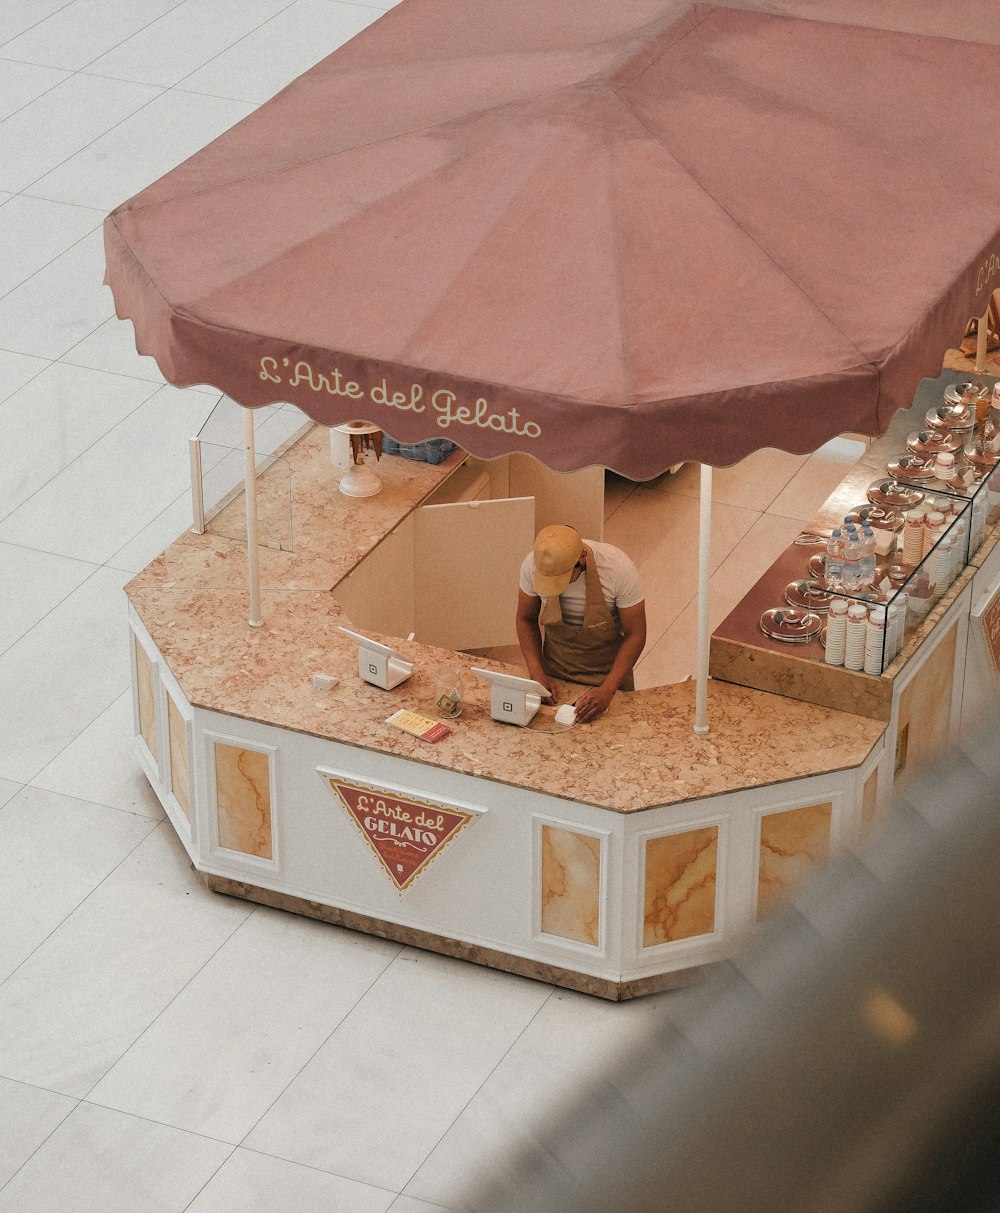 a food stand with a red umbrella and a man sitting at it